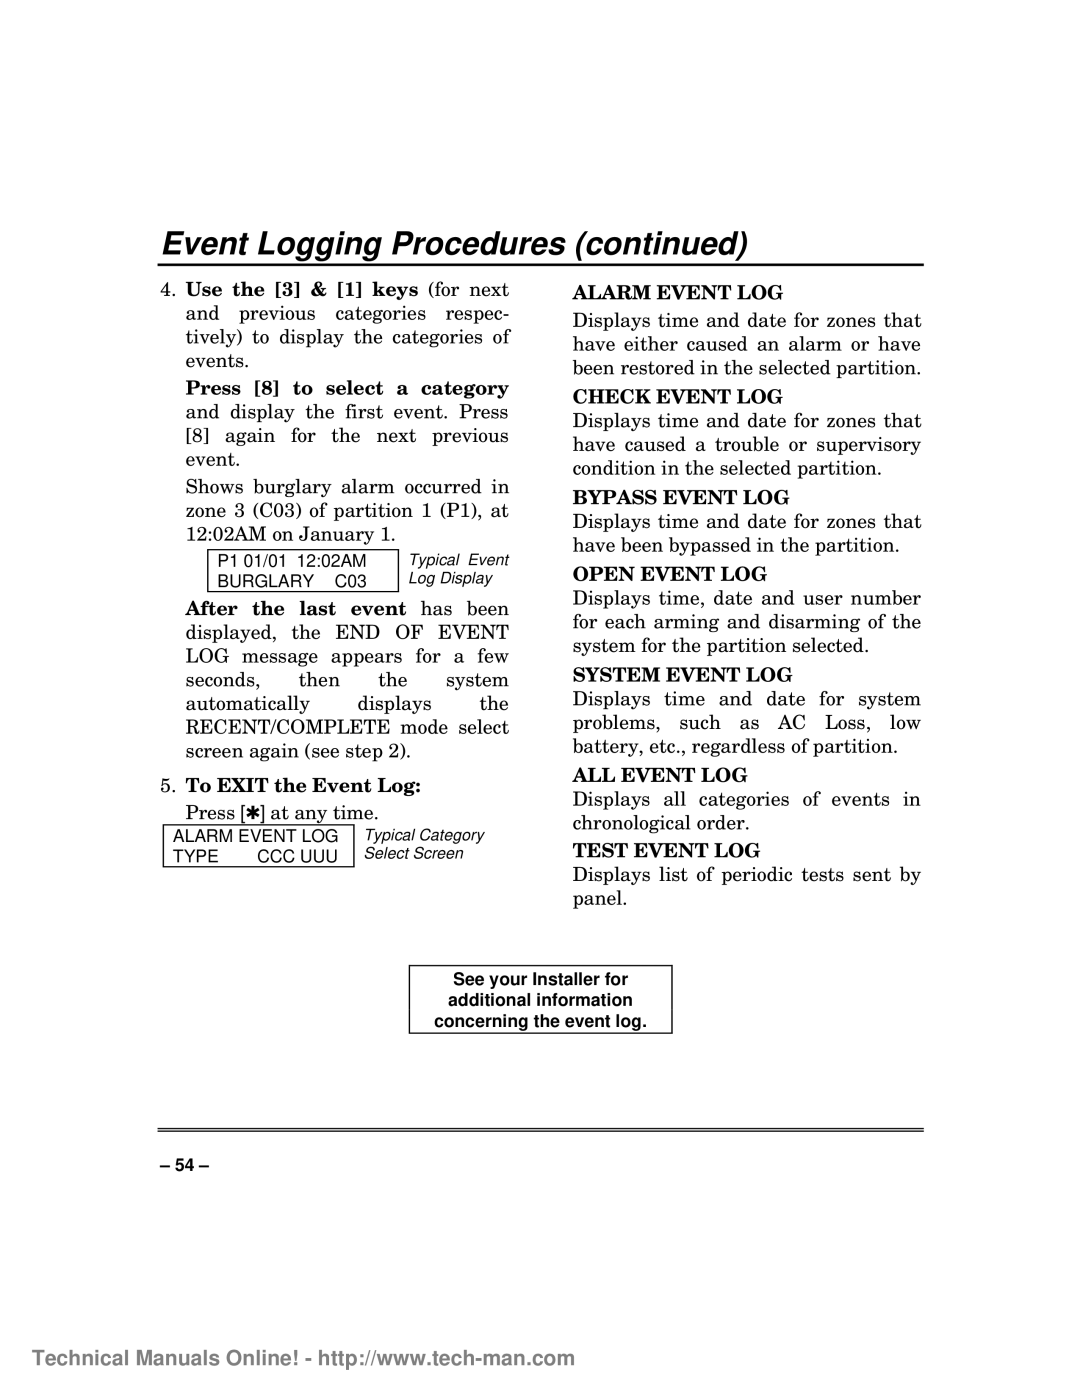 First Alert fa1600c Event Logging Procedures continued, To EXIT the Event Log, Alarm Event Log, Check Event Log 